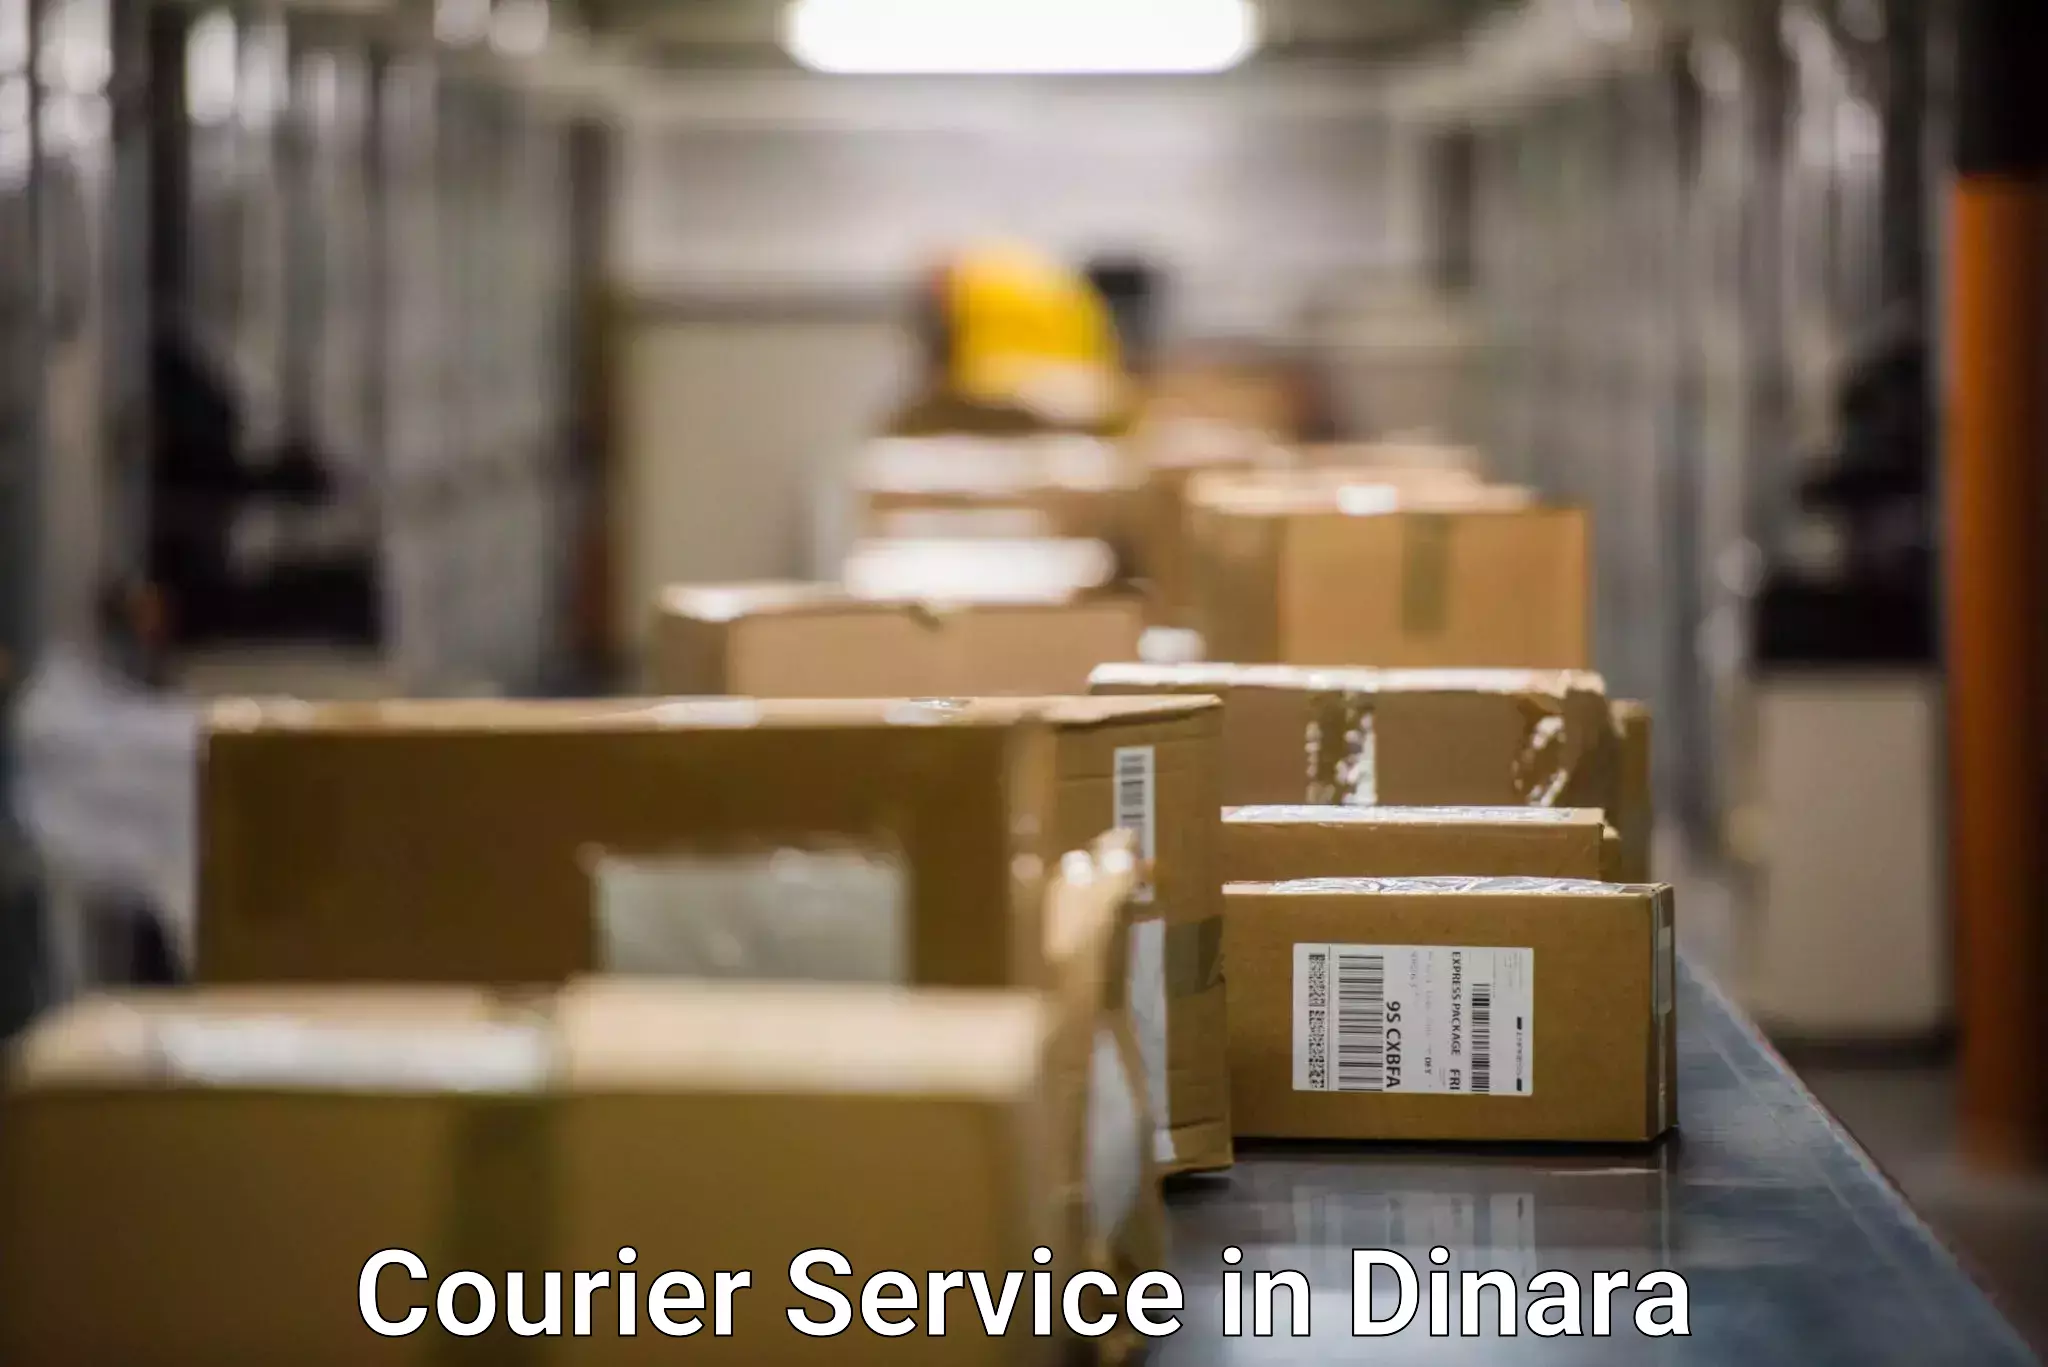 Secure freight services in Dinara